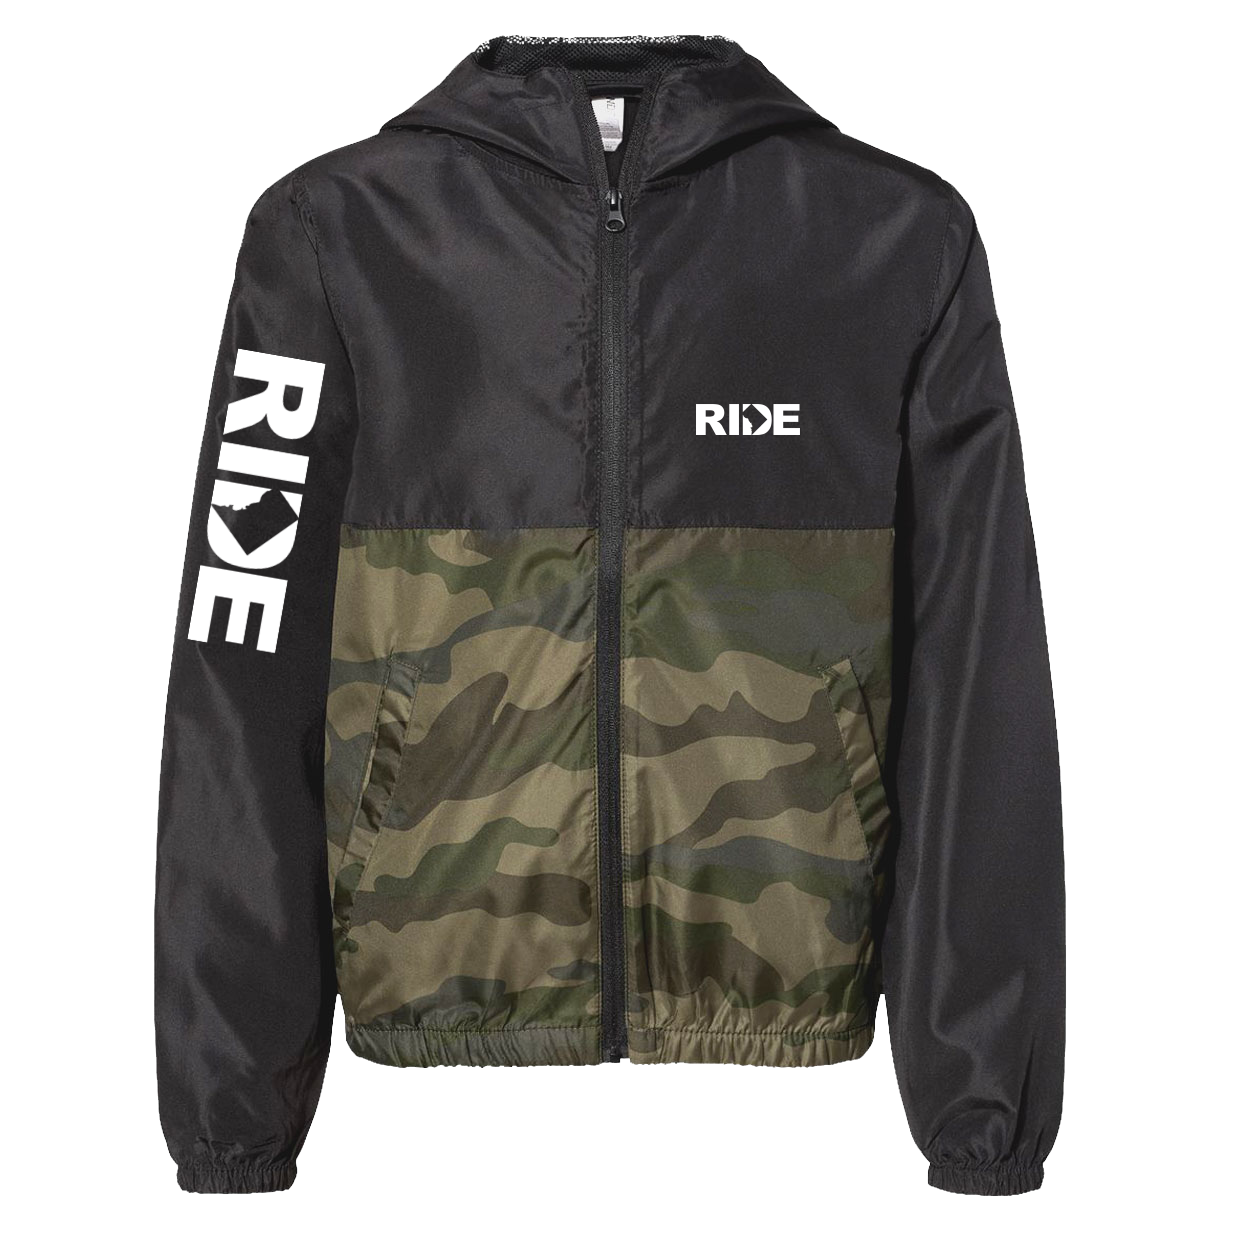 Ride District of Columbia Classic Youth Lightweight Windbreaker Black/Forest Camo 